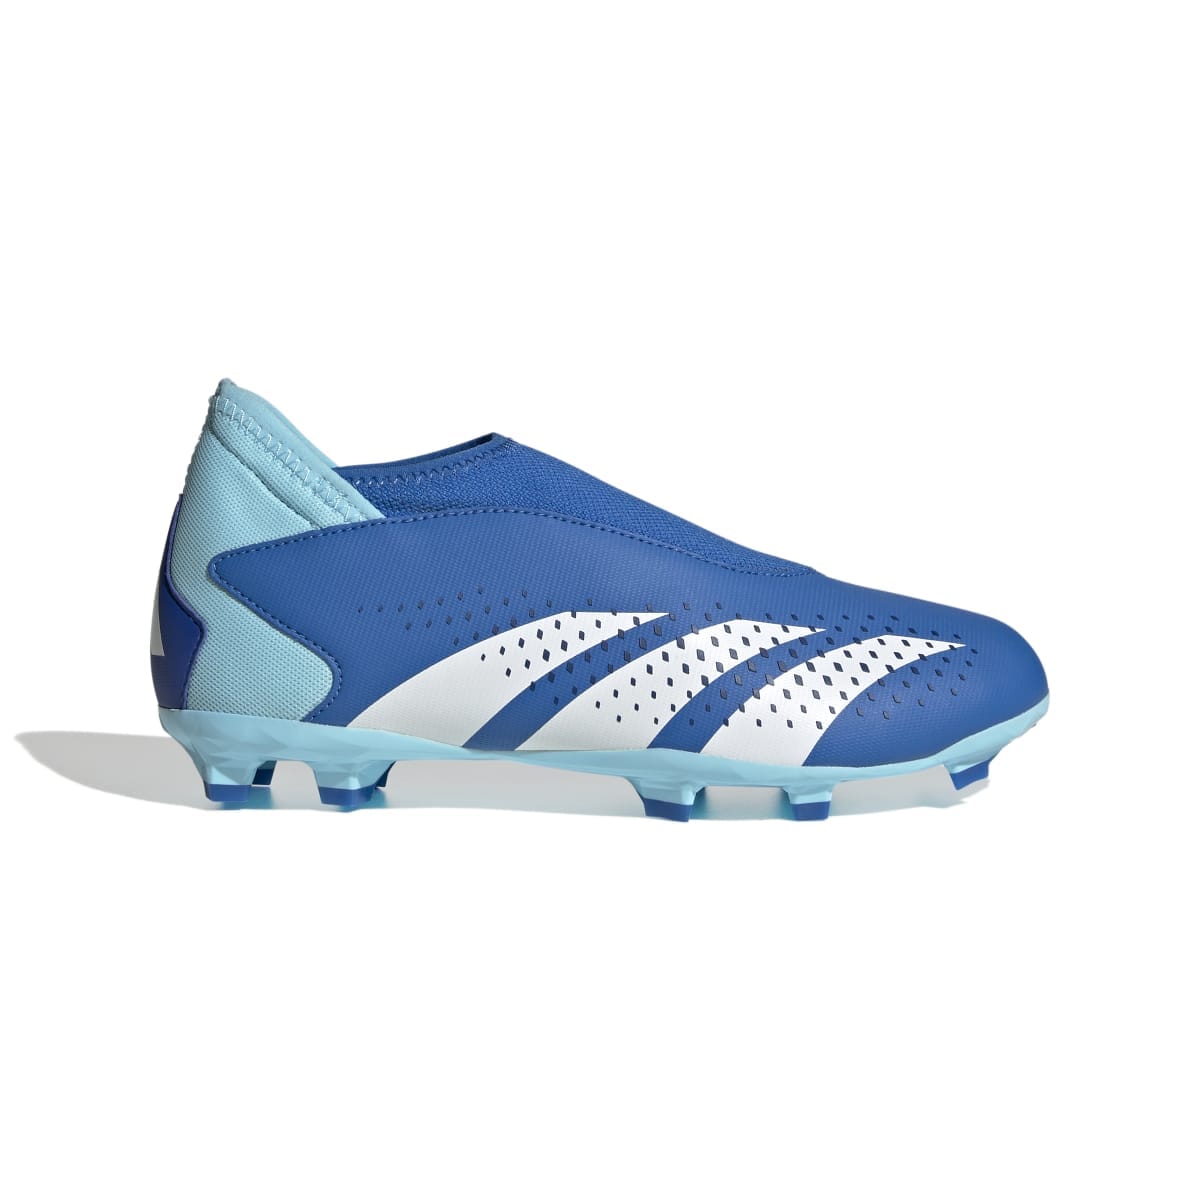 adidas Youth Predator Accuracy.3 LL Firm Ground Cleats | IF2266 Soccer Cleats Adidas 1 Bright Royal / FTWR White / Bliss Blue 